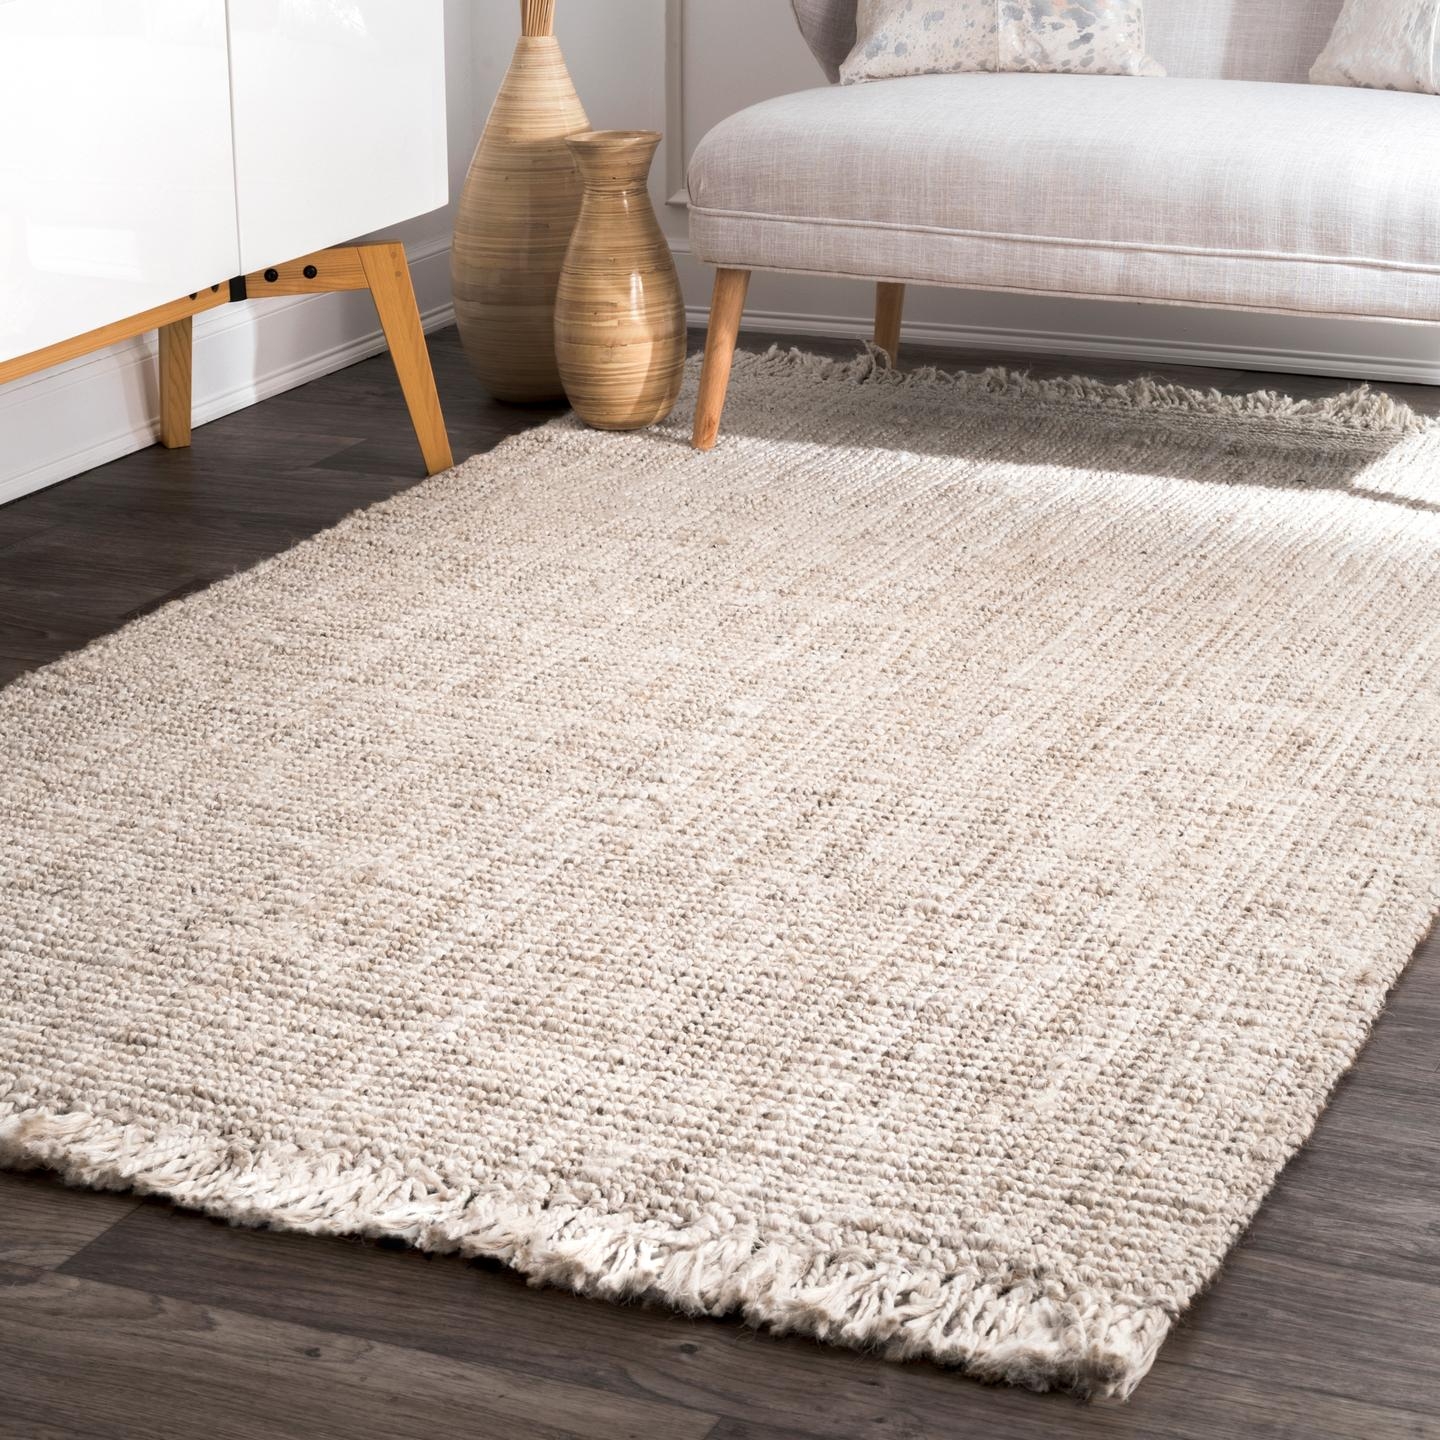 Hand Woven Chunky Loop Jute Area Rug, 9'6" x 11'6", Off White - Image 3